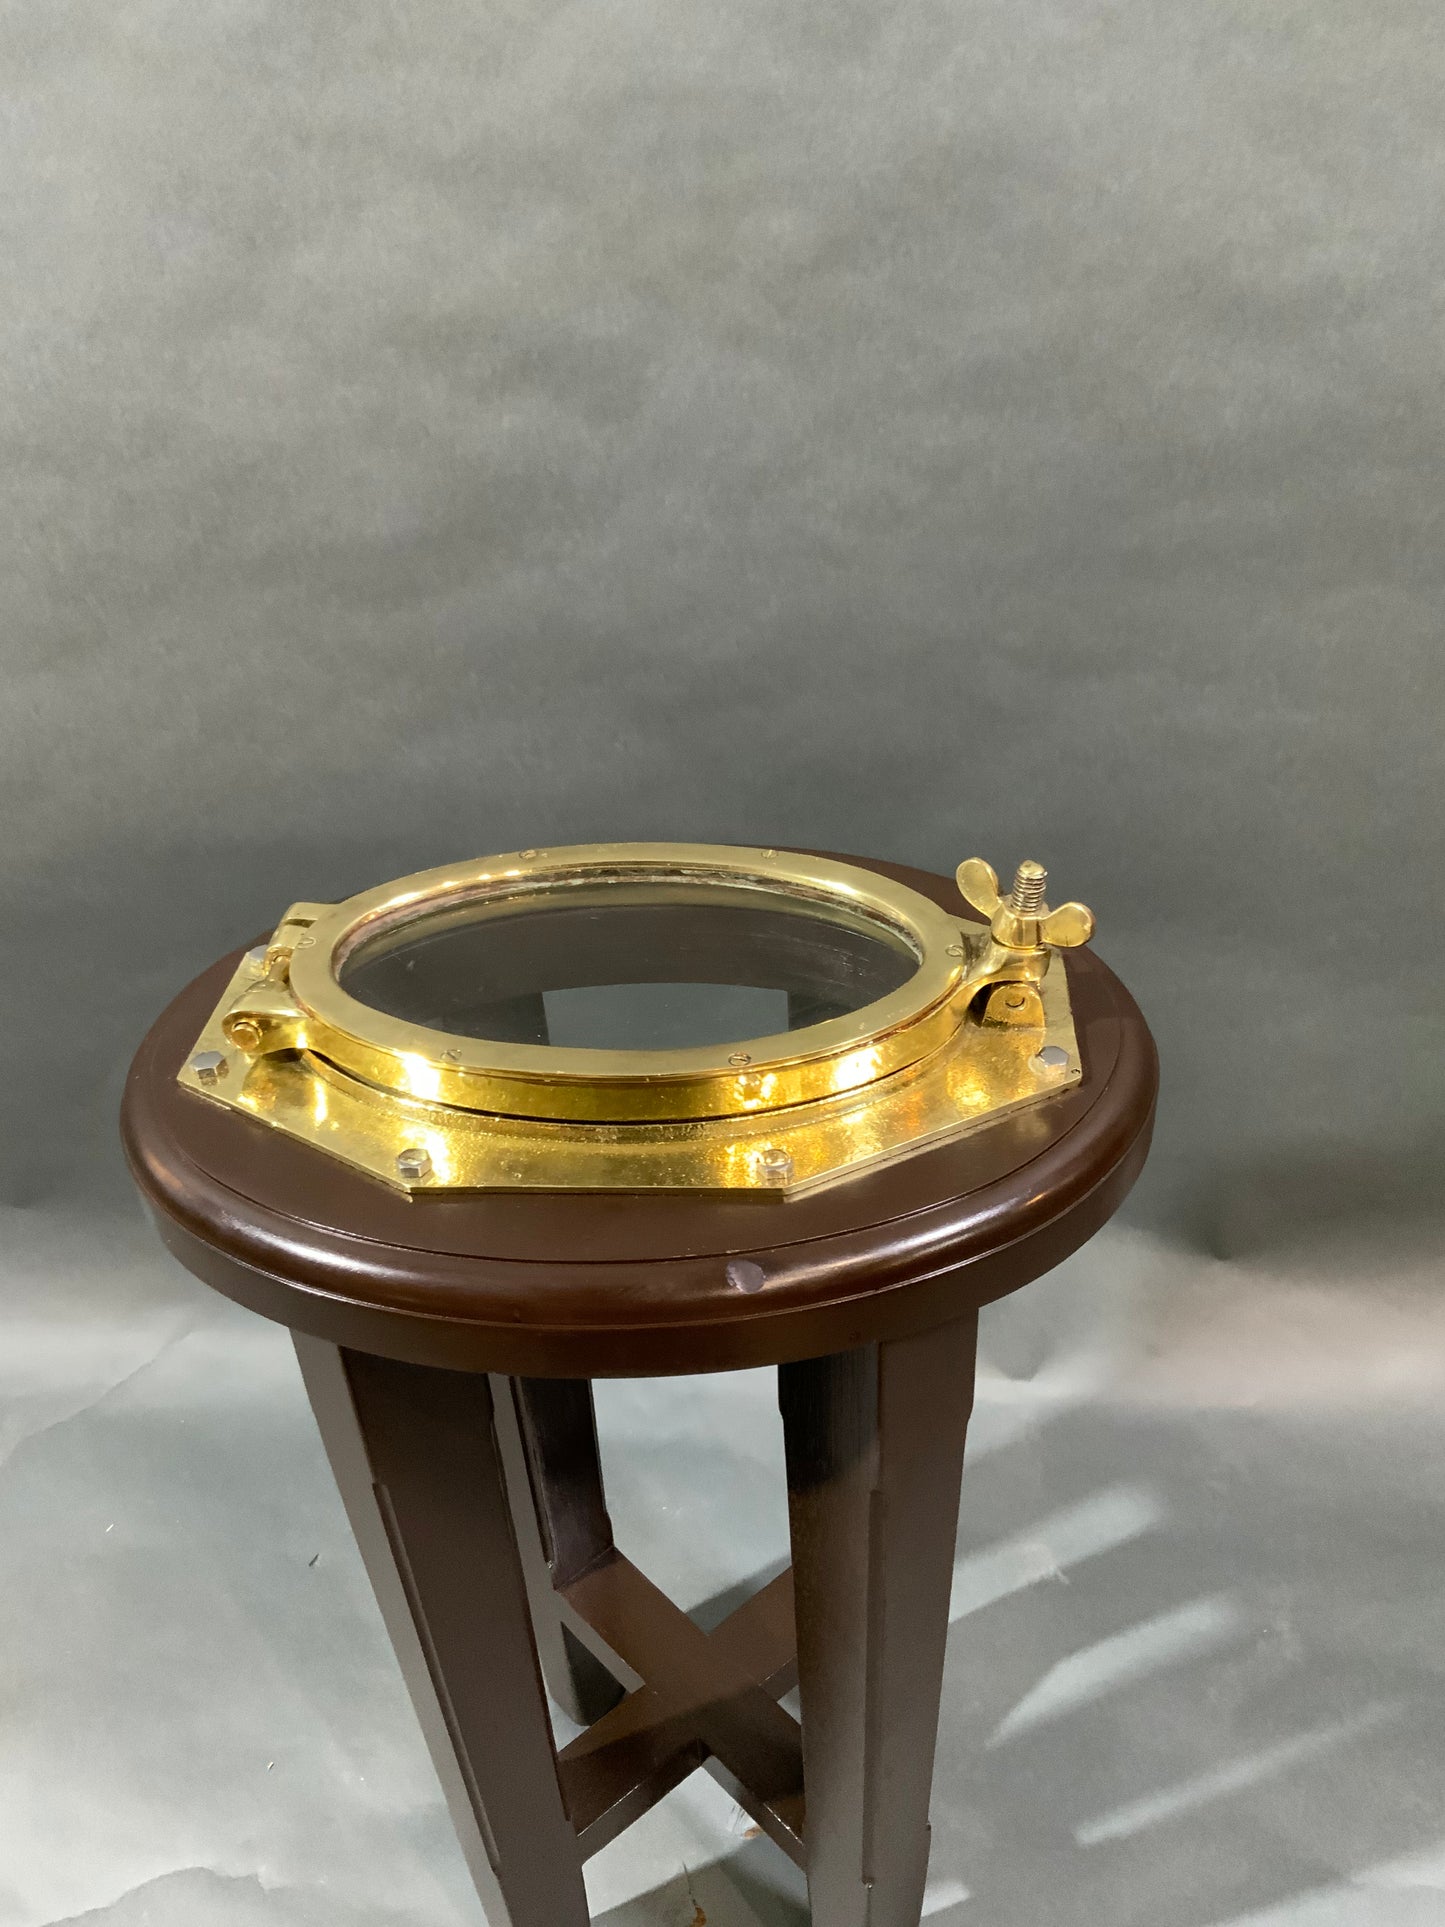 Authentic Solid Brass Boat Porthole Table - Lannan Gallery